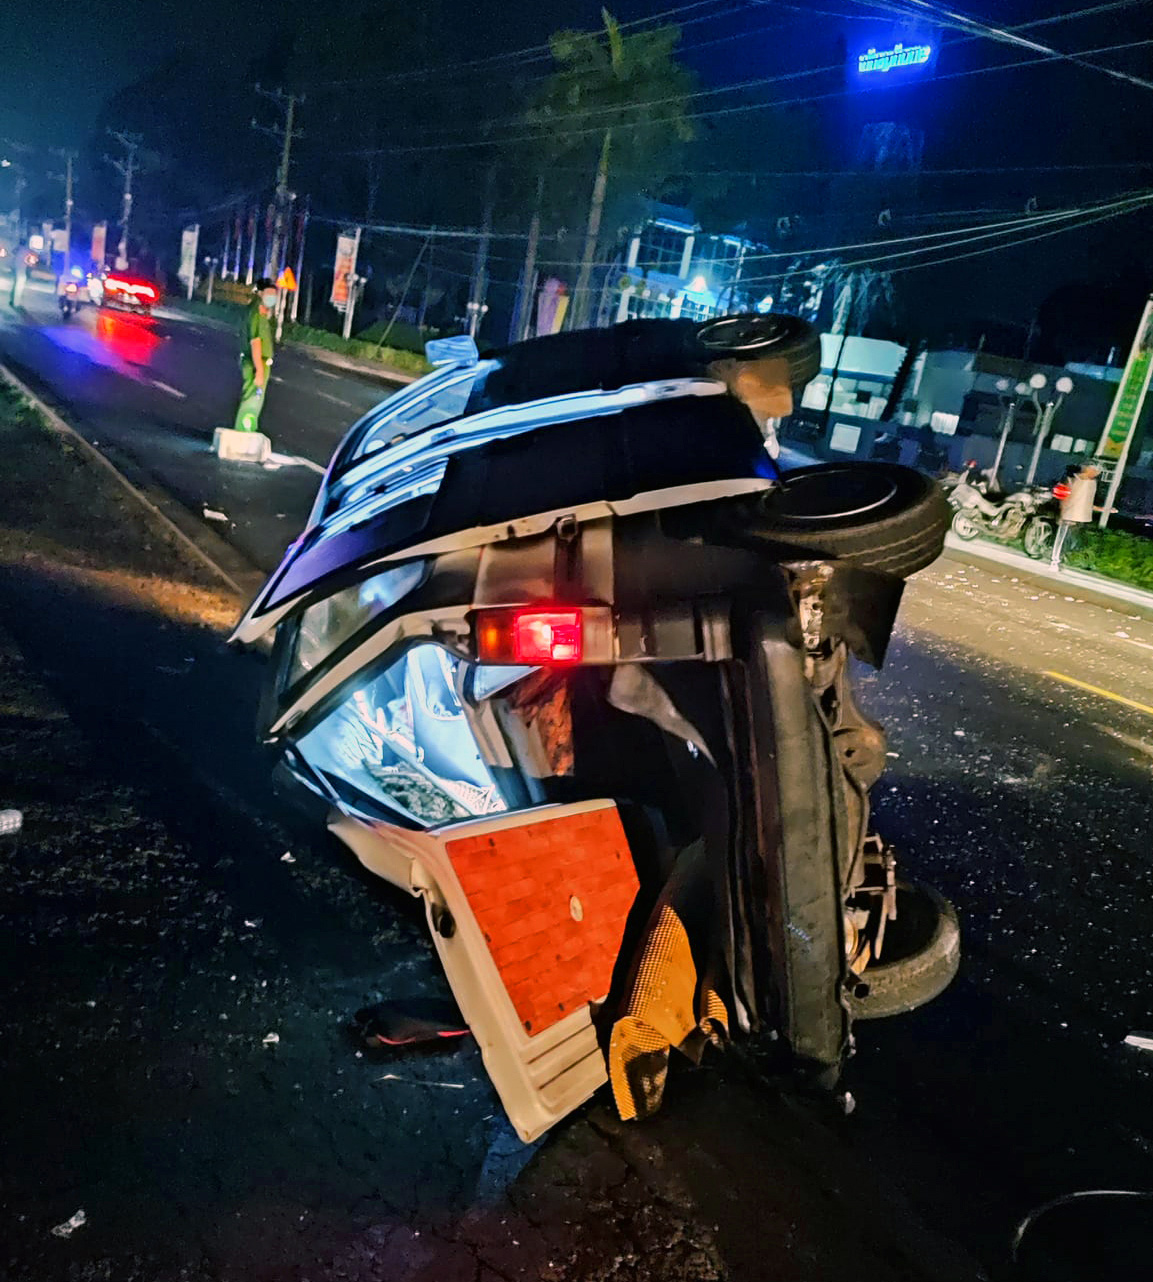 A seven-seater car is knocked over following a traffic accident on National Highway 20 in Tan Phu District, Dong Nai Province, southern Vietnam. Photo: An Binh / Tuoi Tre